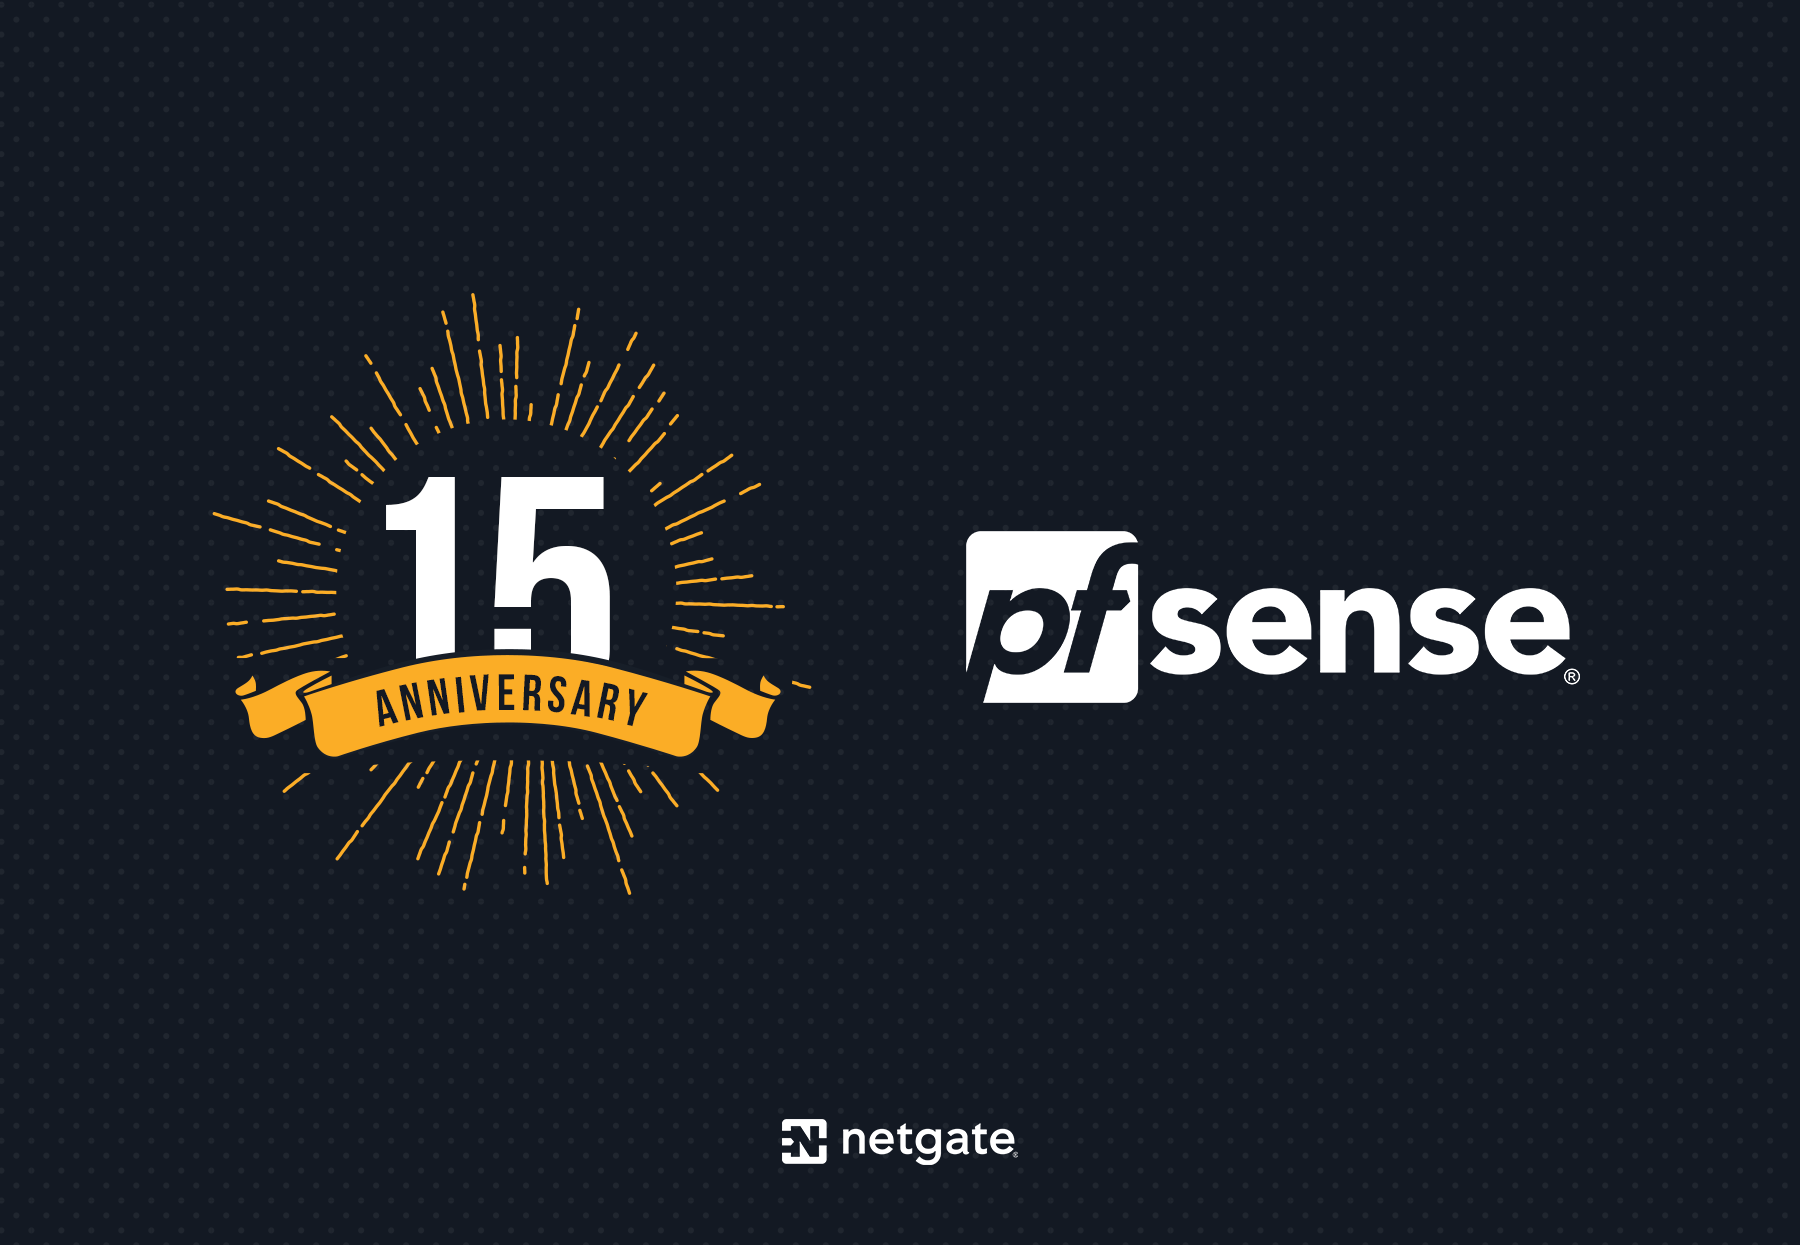 pfSense Software is 15 Today!